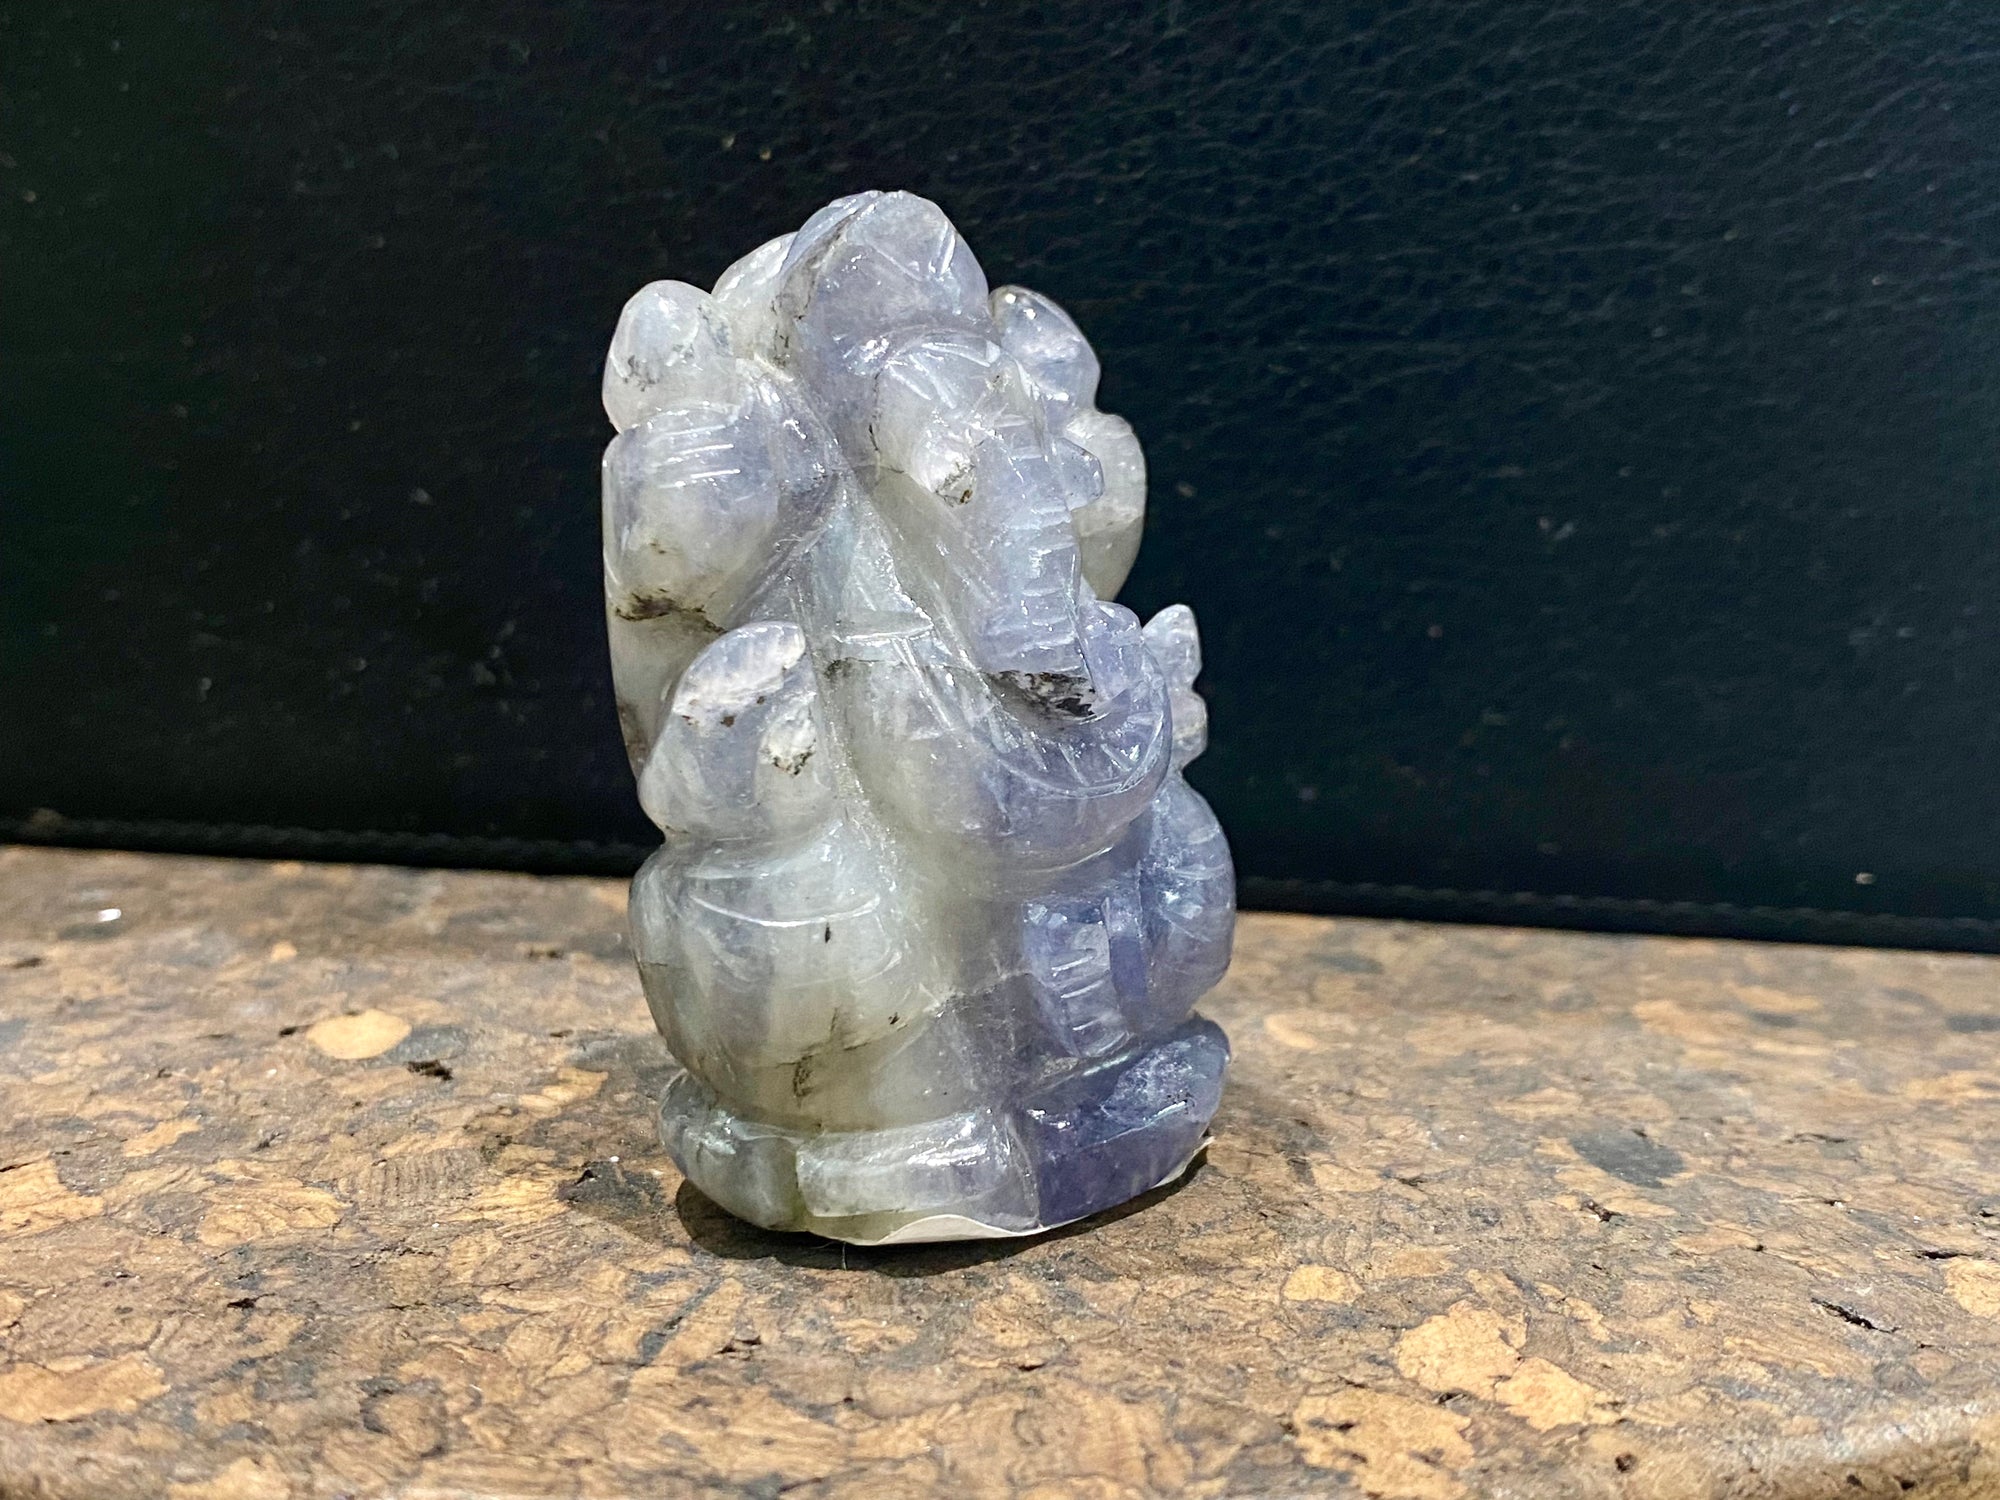 Hand carved from a solid chunk of iolite crystal, our Ganesha statue has a very contemporary feel. Ganesh is the lord of wisdom, remover of obstacles, patron of the the arts and new beginnings. Keeps unwanted influences from your door. Measurements: 5 cm height, width at base 3.5 cm